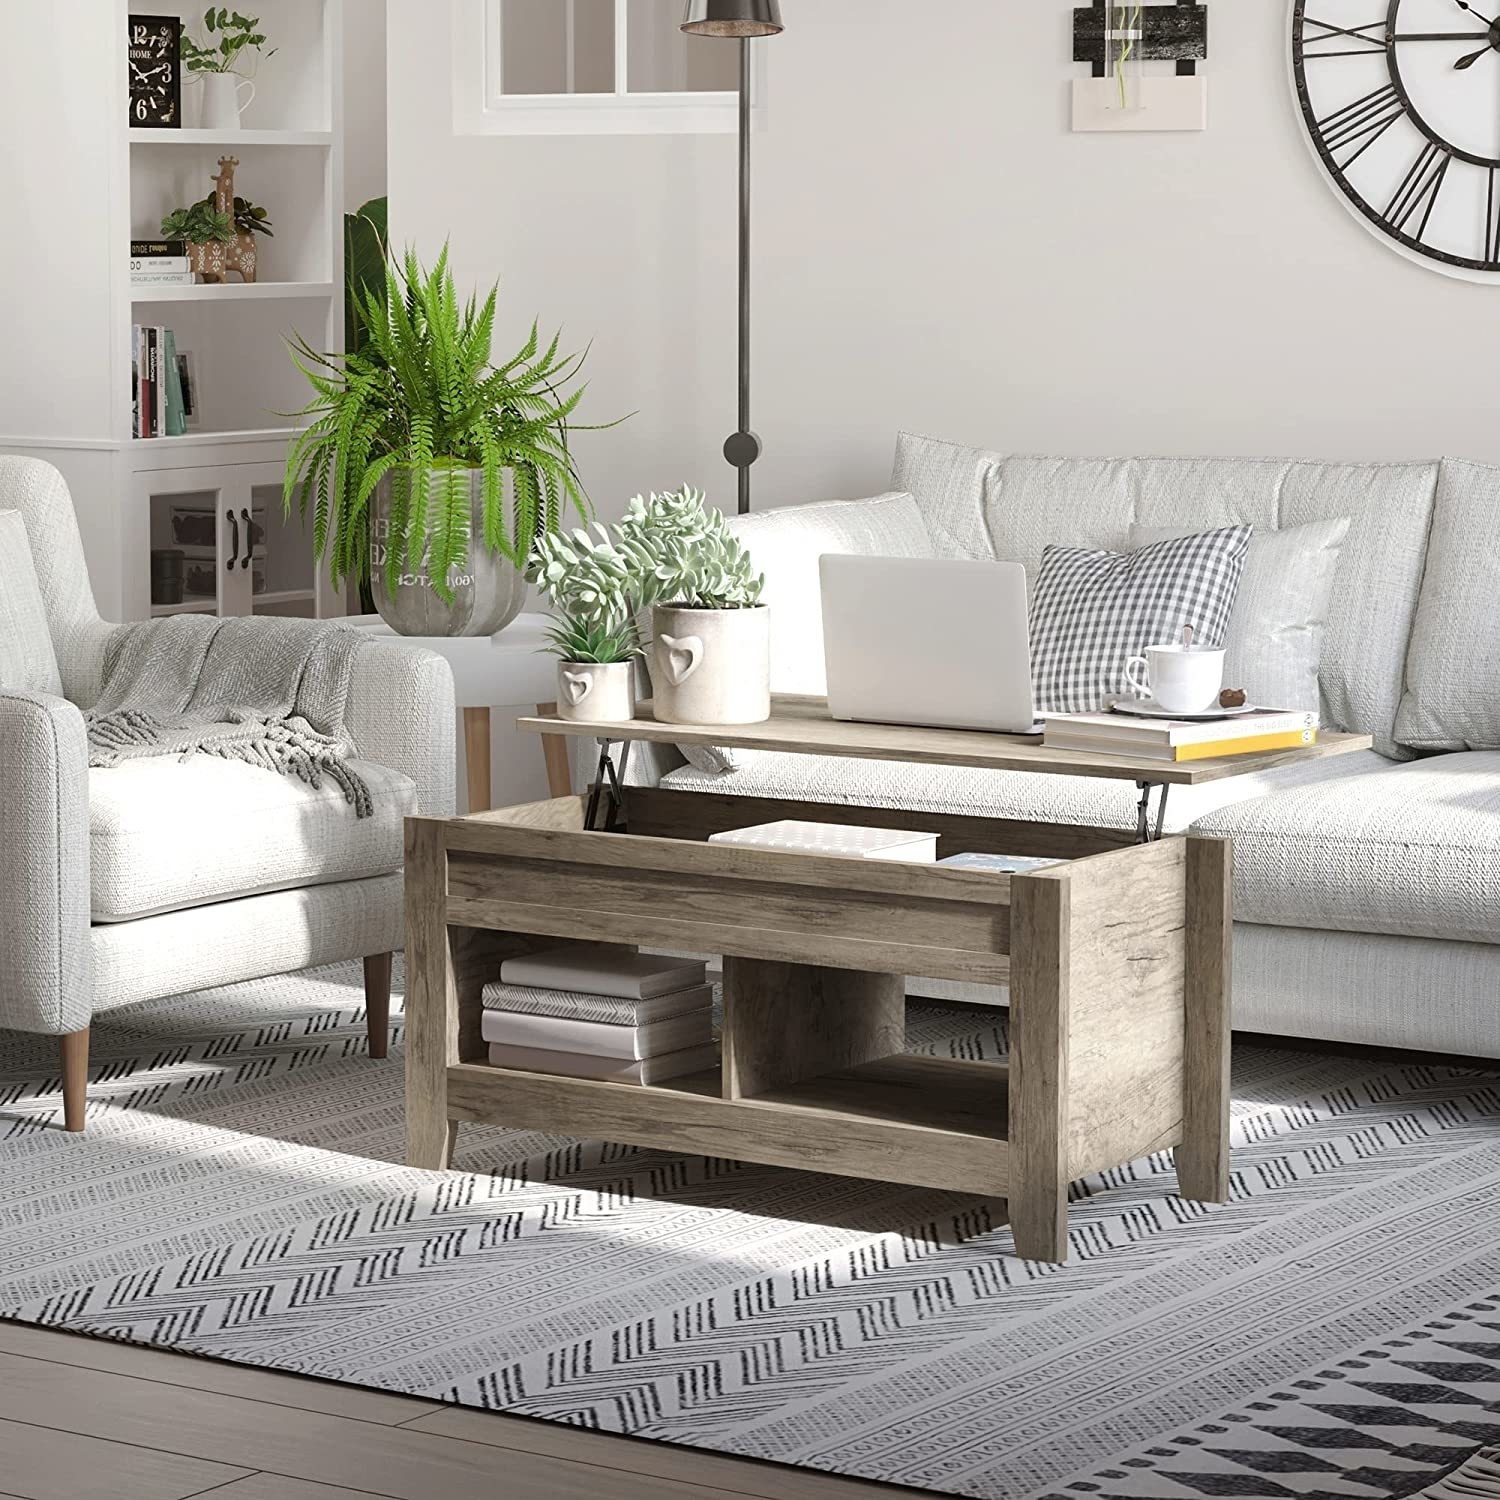 Photo of Oak effect lift top coffee table - ryder